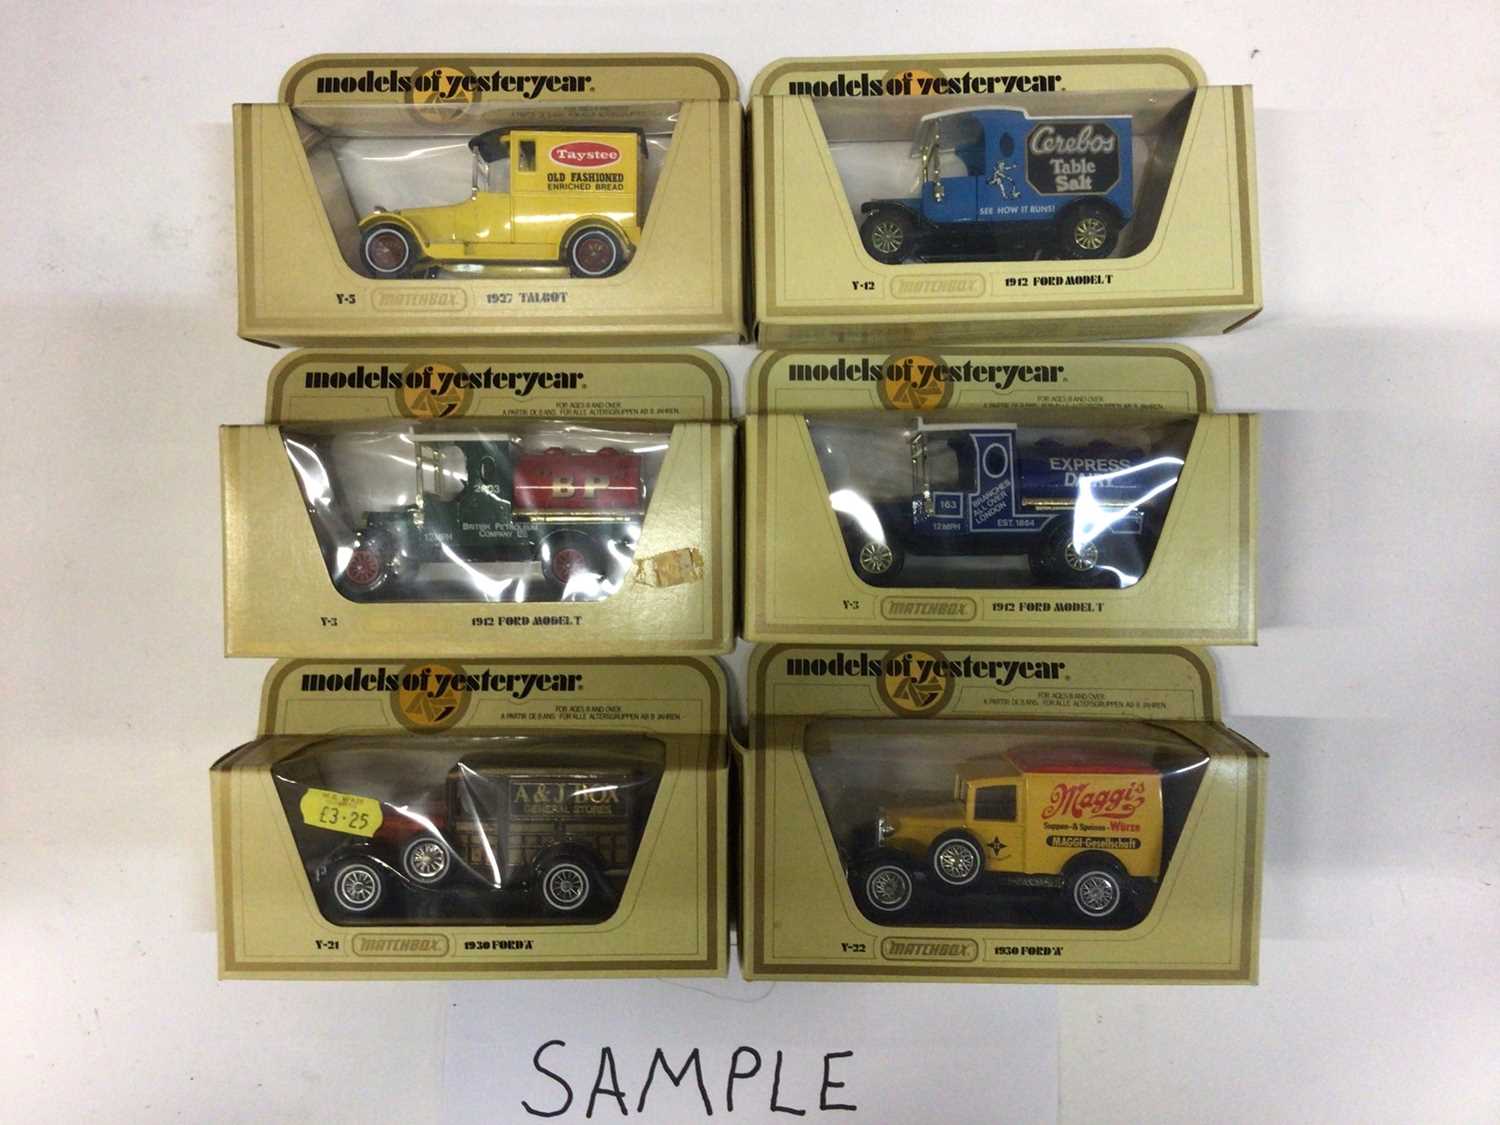 Selection of Models of Yesteryear, boxed and unboxed models.